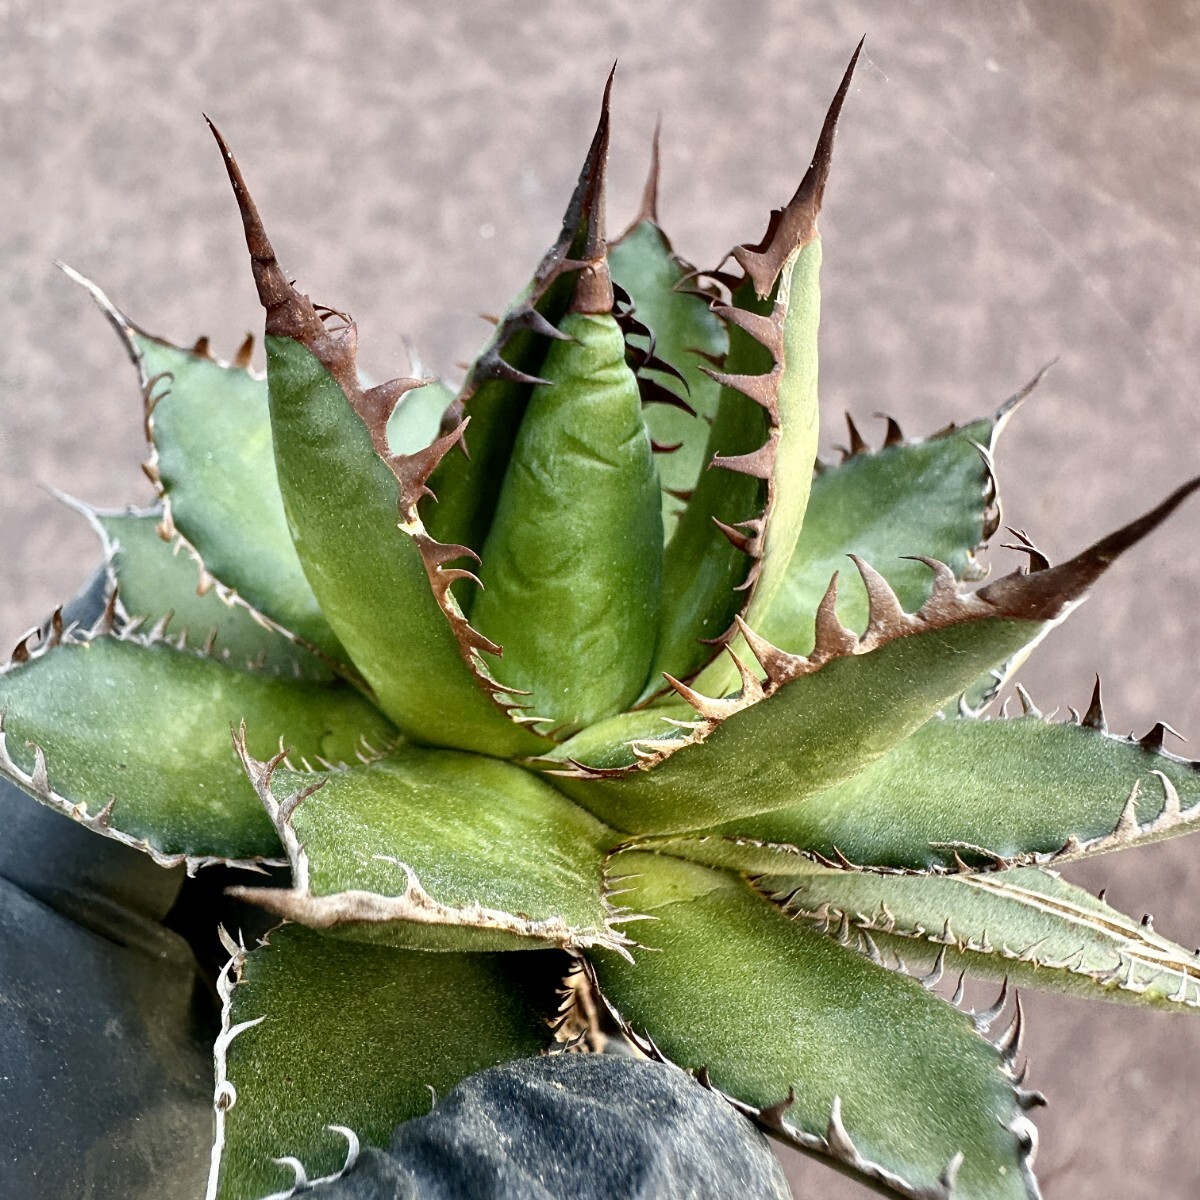 [Lj_plants]Z68 succulent plant agave a little over . Hori dahorrida finest quality a little over . finest quality beautiful stock 